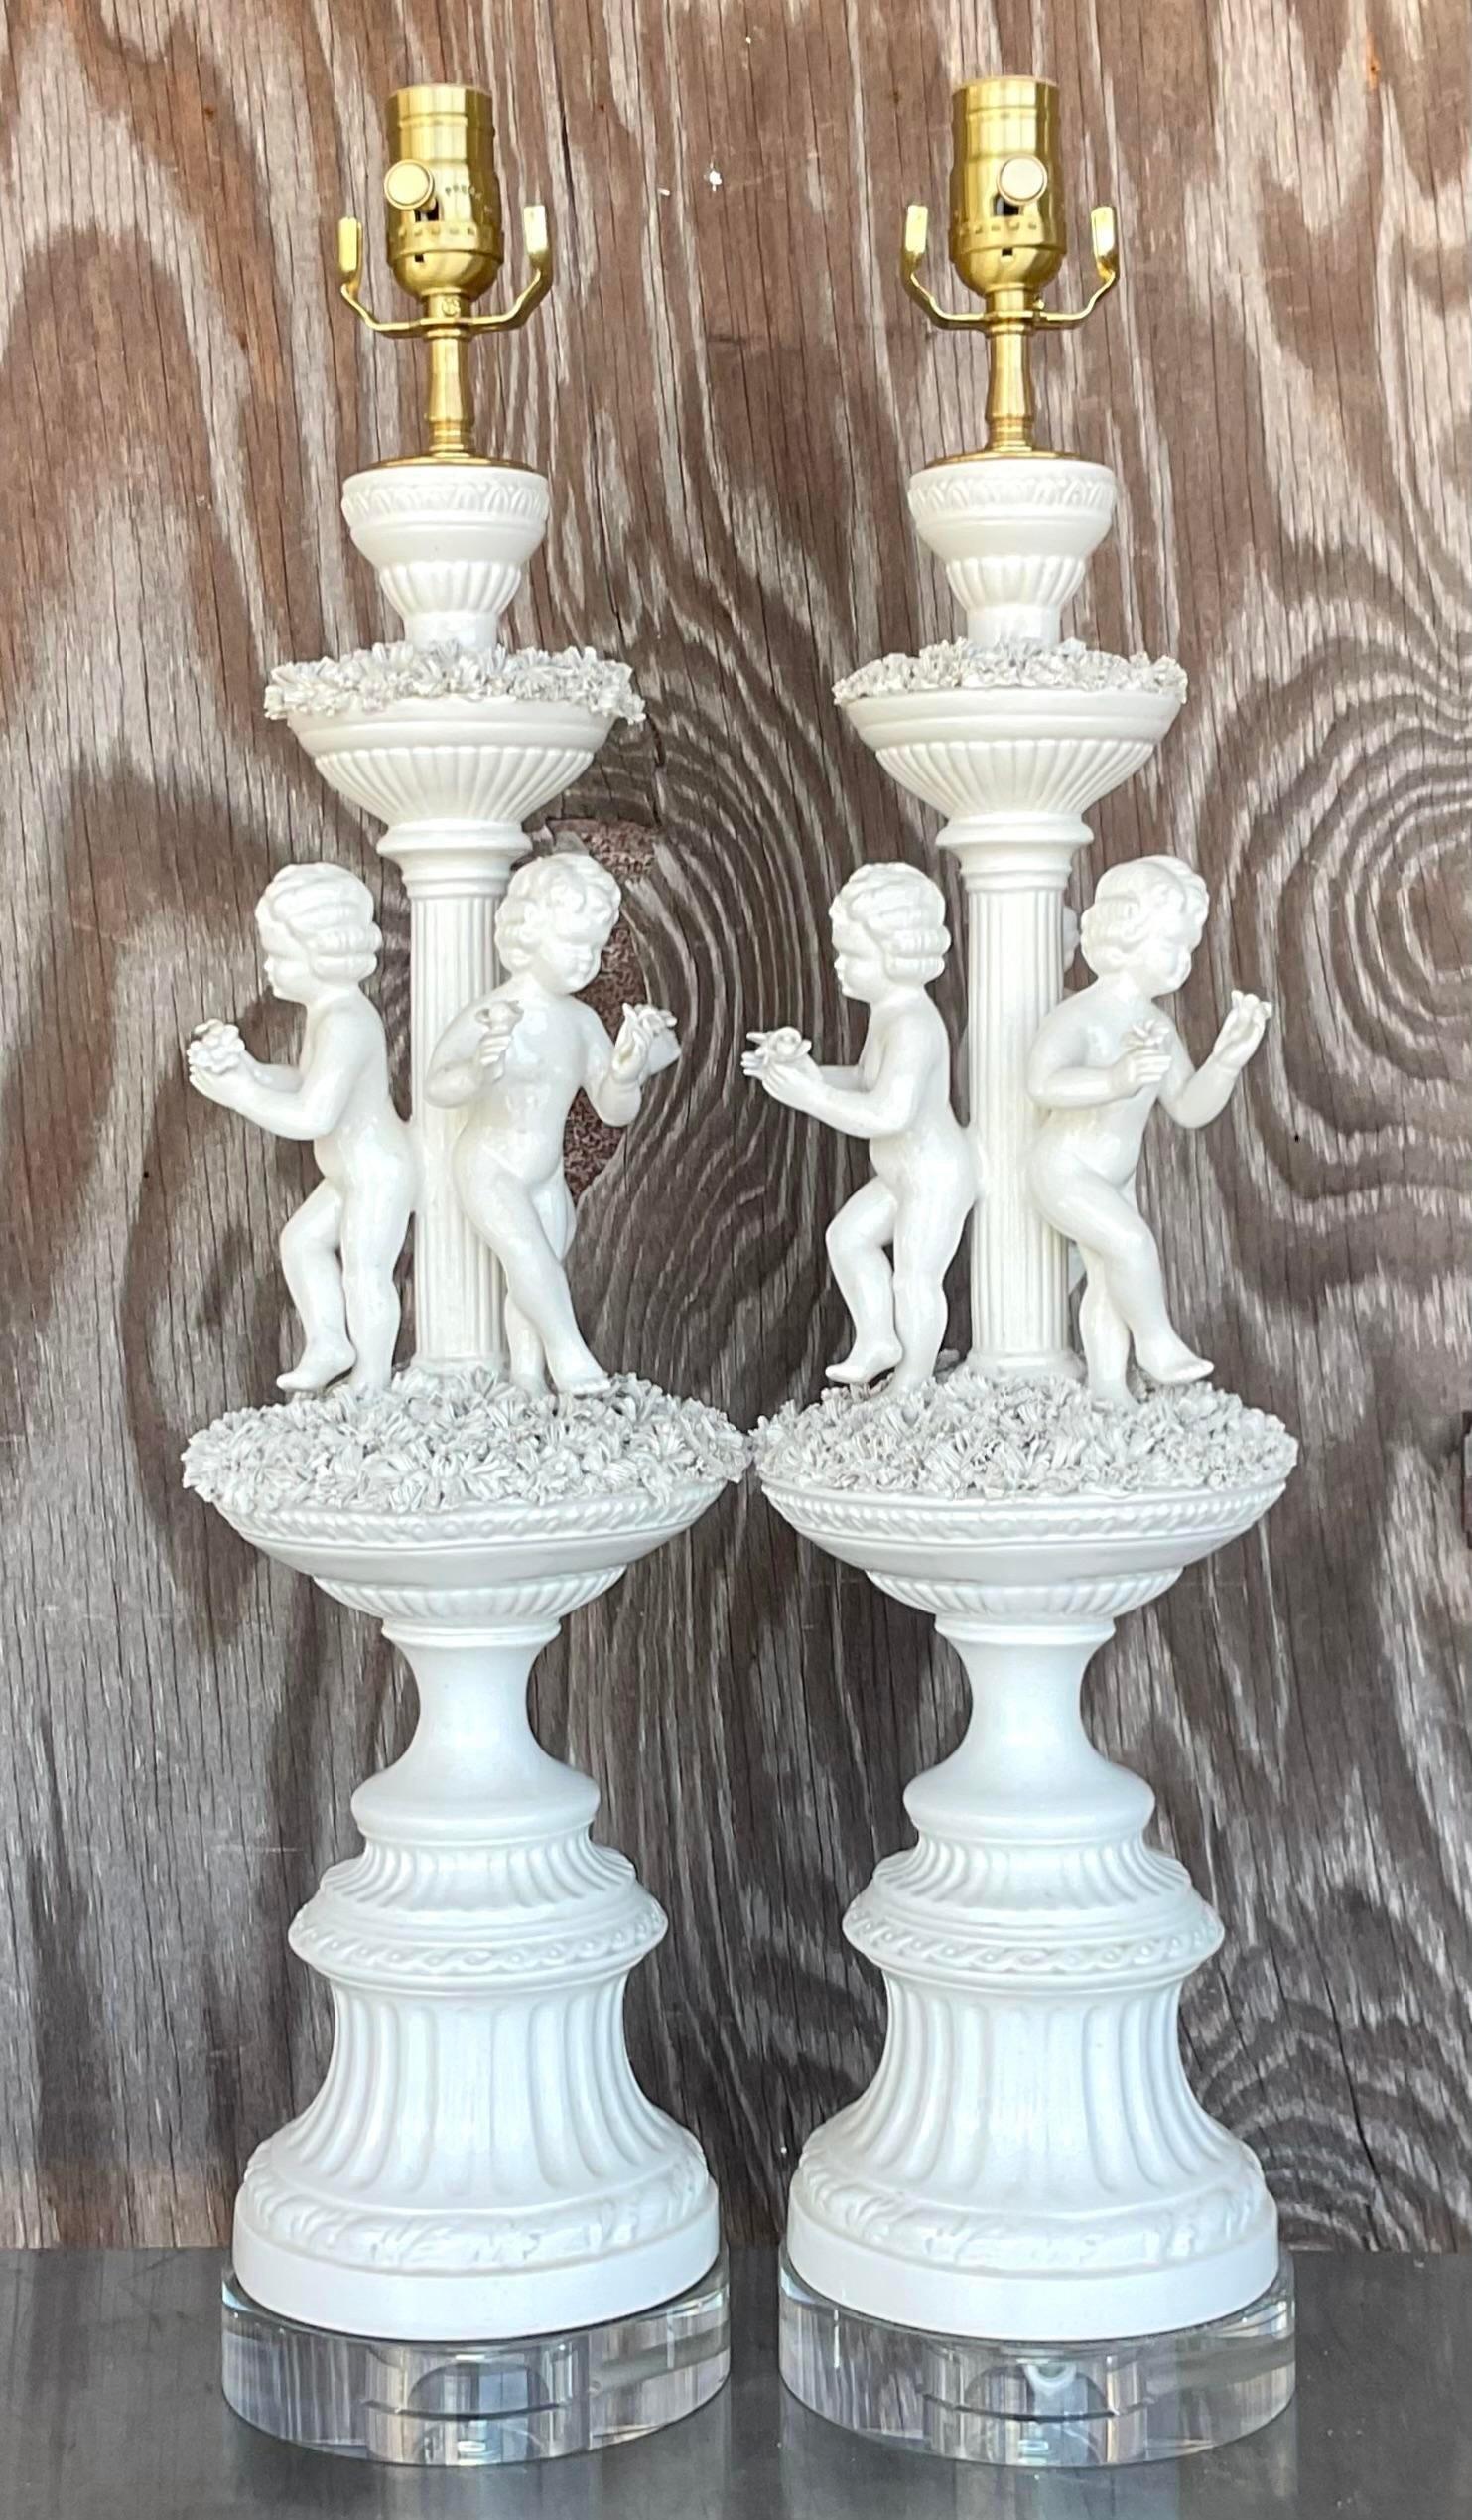 Vintage Regency Glazed Ceramic Putti Style Lamps - a Pair For Sale 4